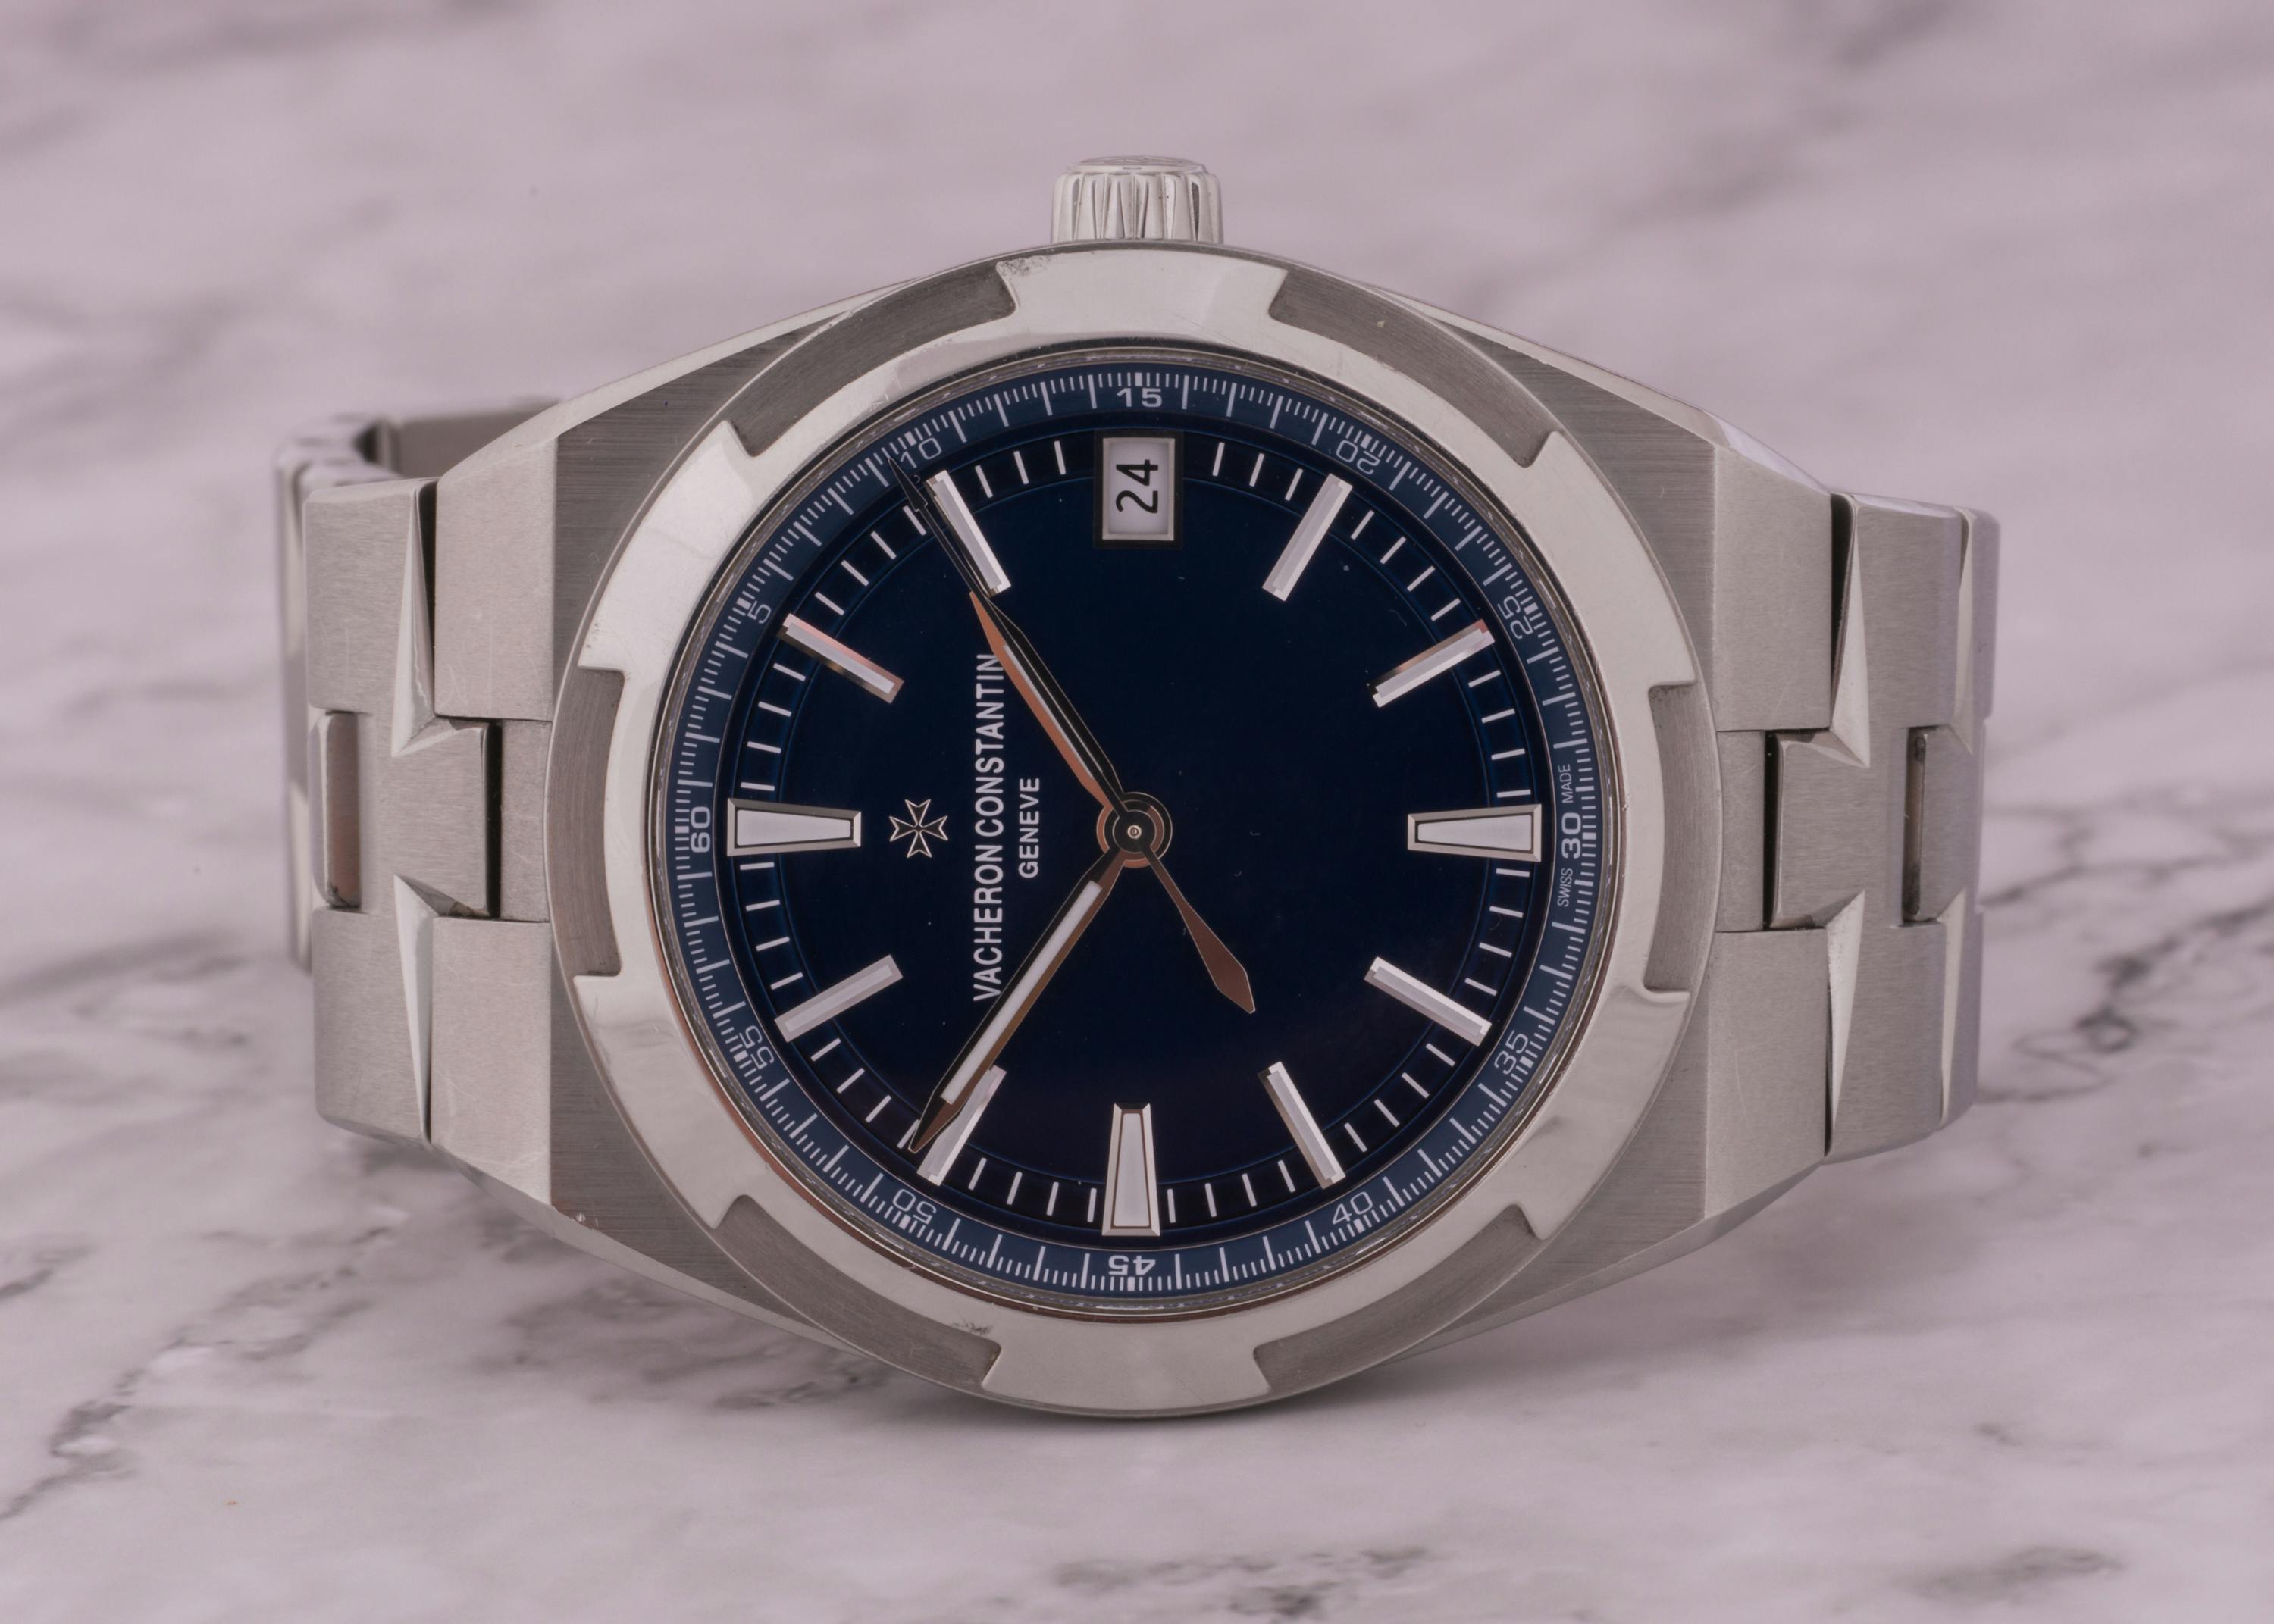 2016 VACHERON CONSTANTIN OVERSEAS for sale by auction in Cardiff, Wales ...